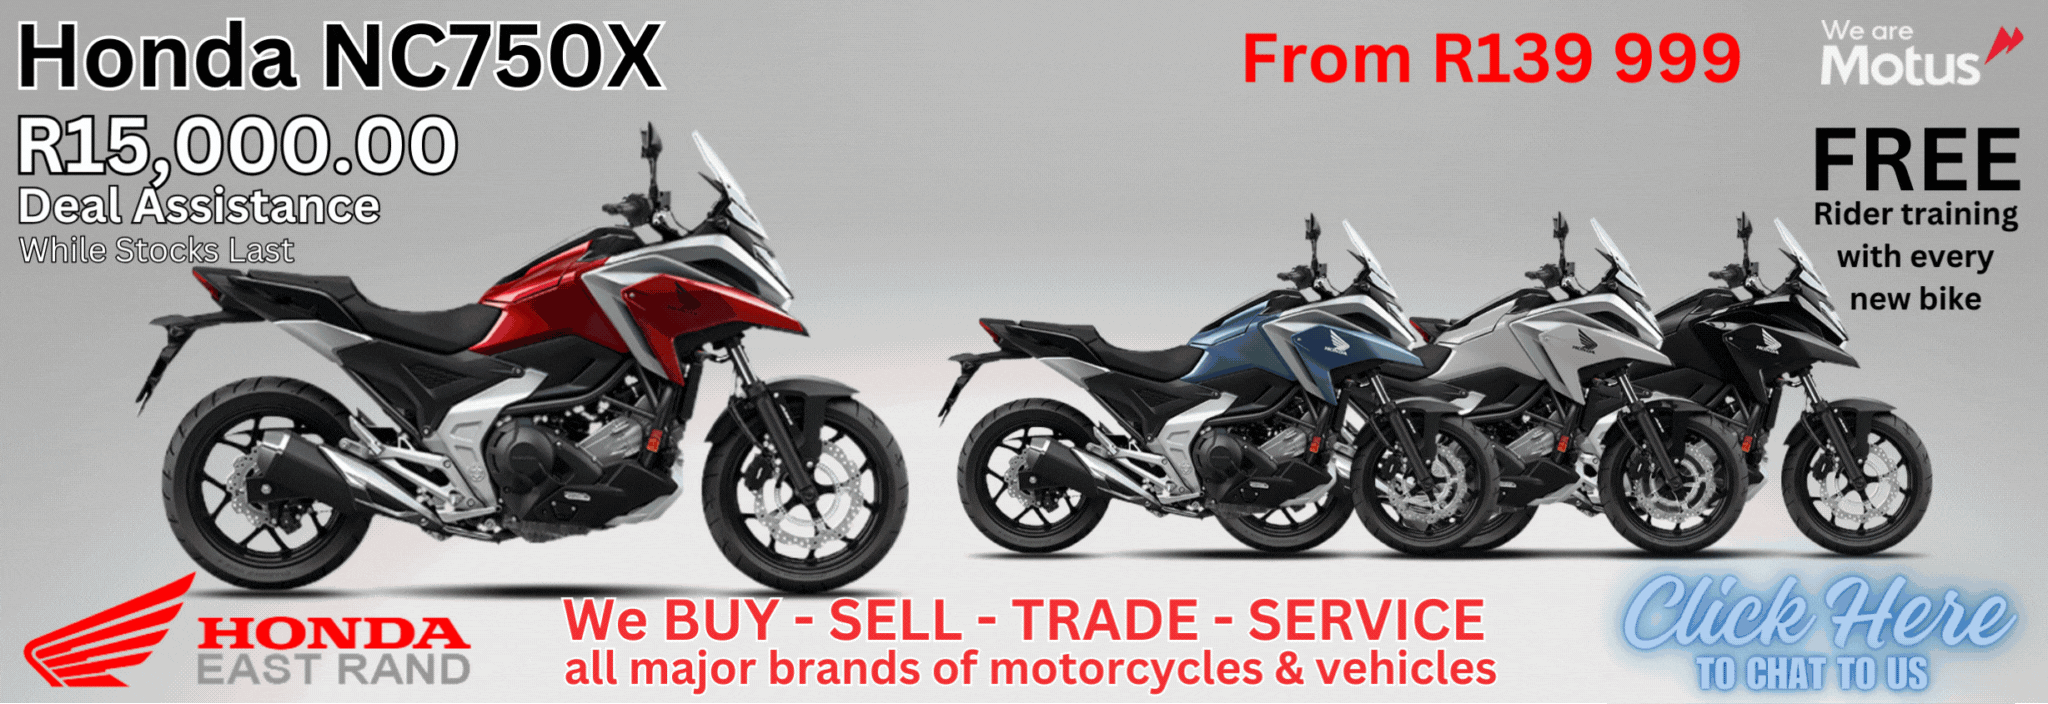 Honda motorcycles for sale parts accessories workshop trade in used motorcycles for sale finance availalble we buy motorcycles